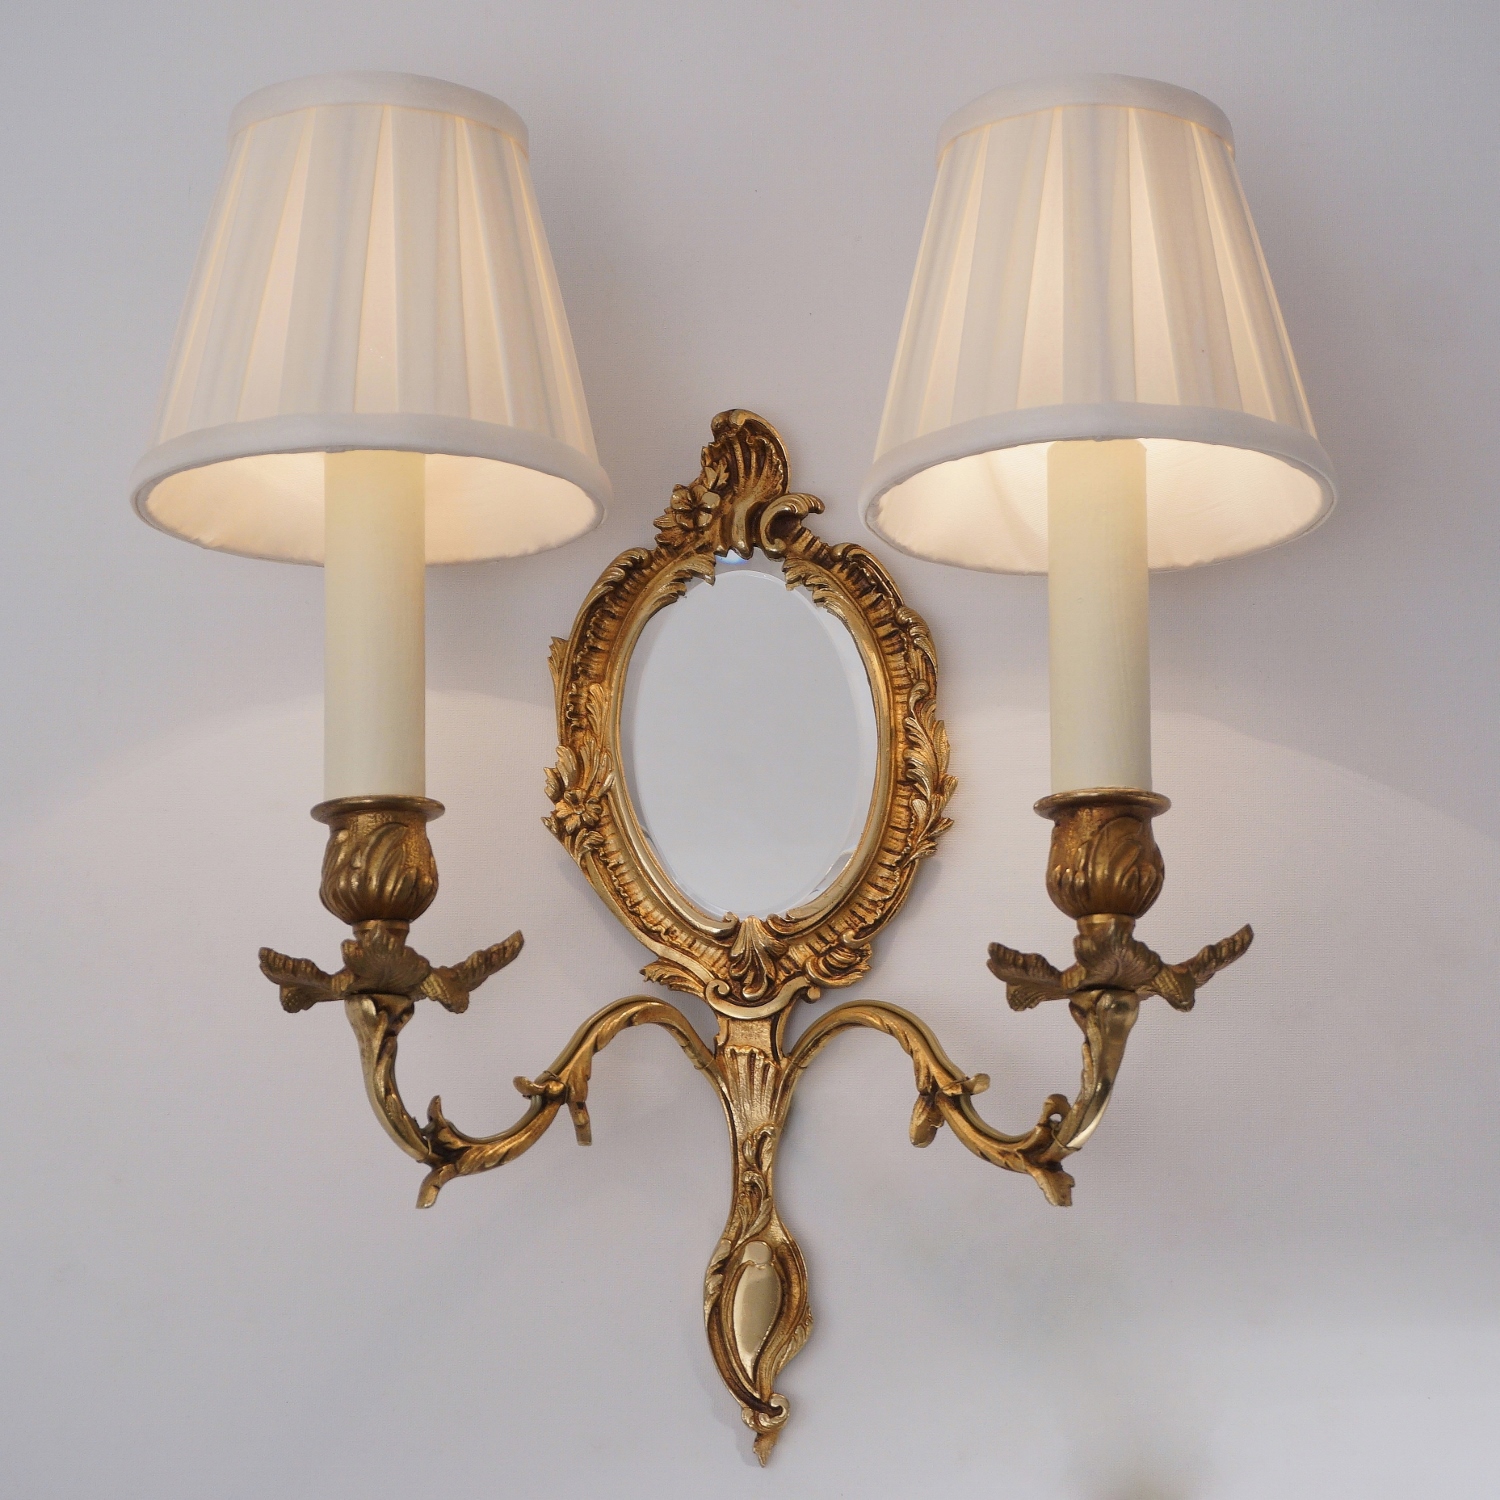 Rococo Candle Sconce, Wall Mounted Lights, Lighting, The Collection